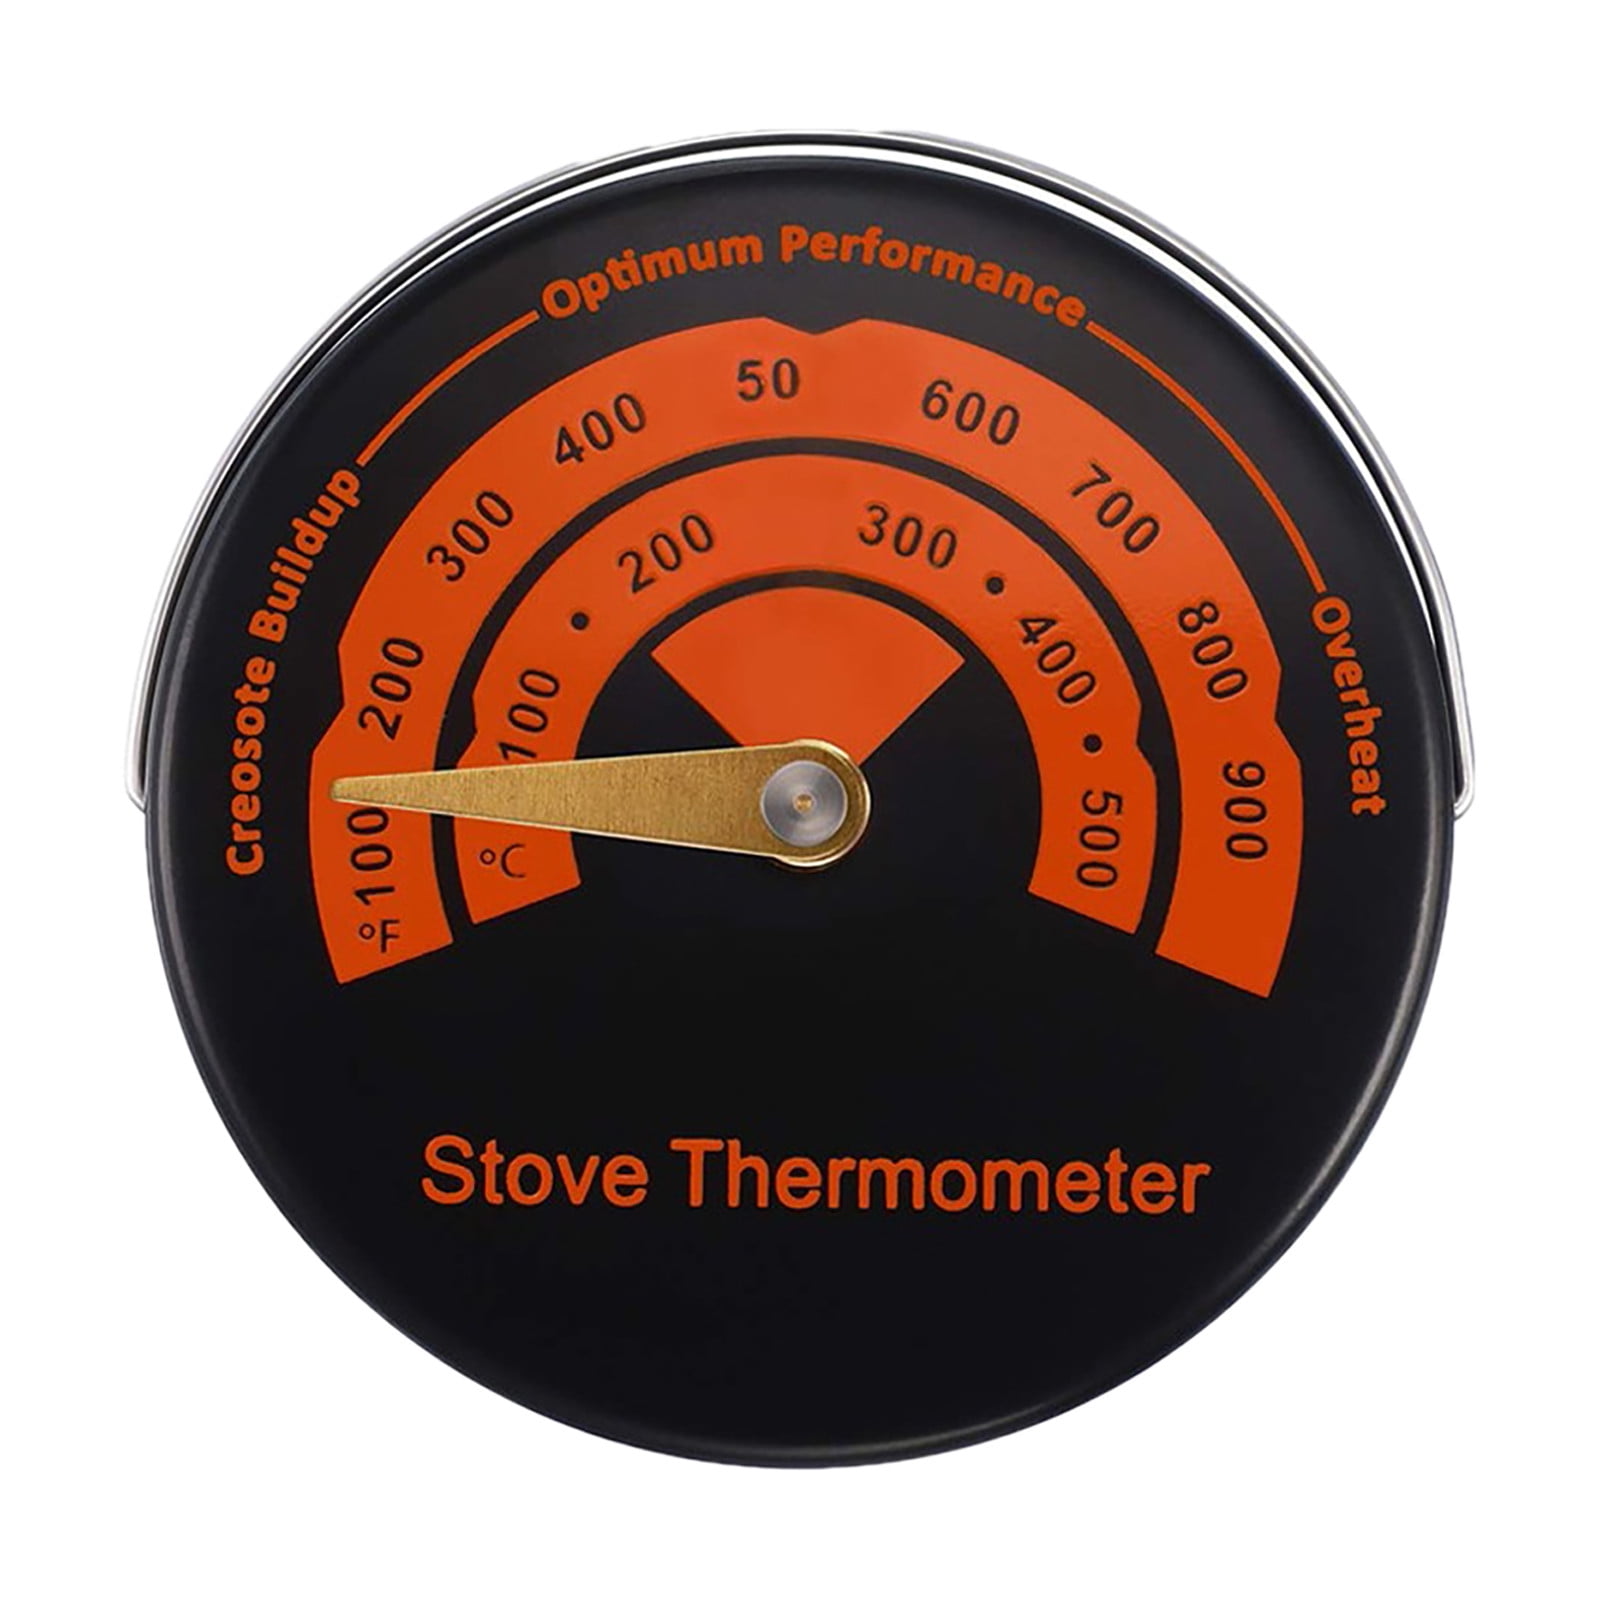 Gas Stoves TIEMORE Oven Temperaturer Wood Stove Thermometer for Wood Burning Stoves Top Pellet Stove Stoves Magnetic Stove Flues 